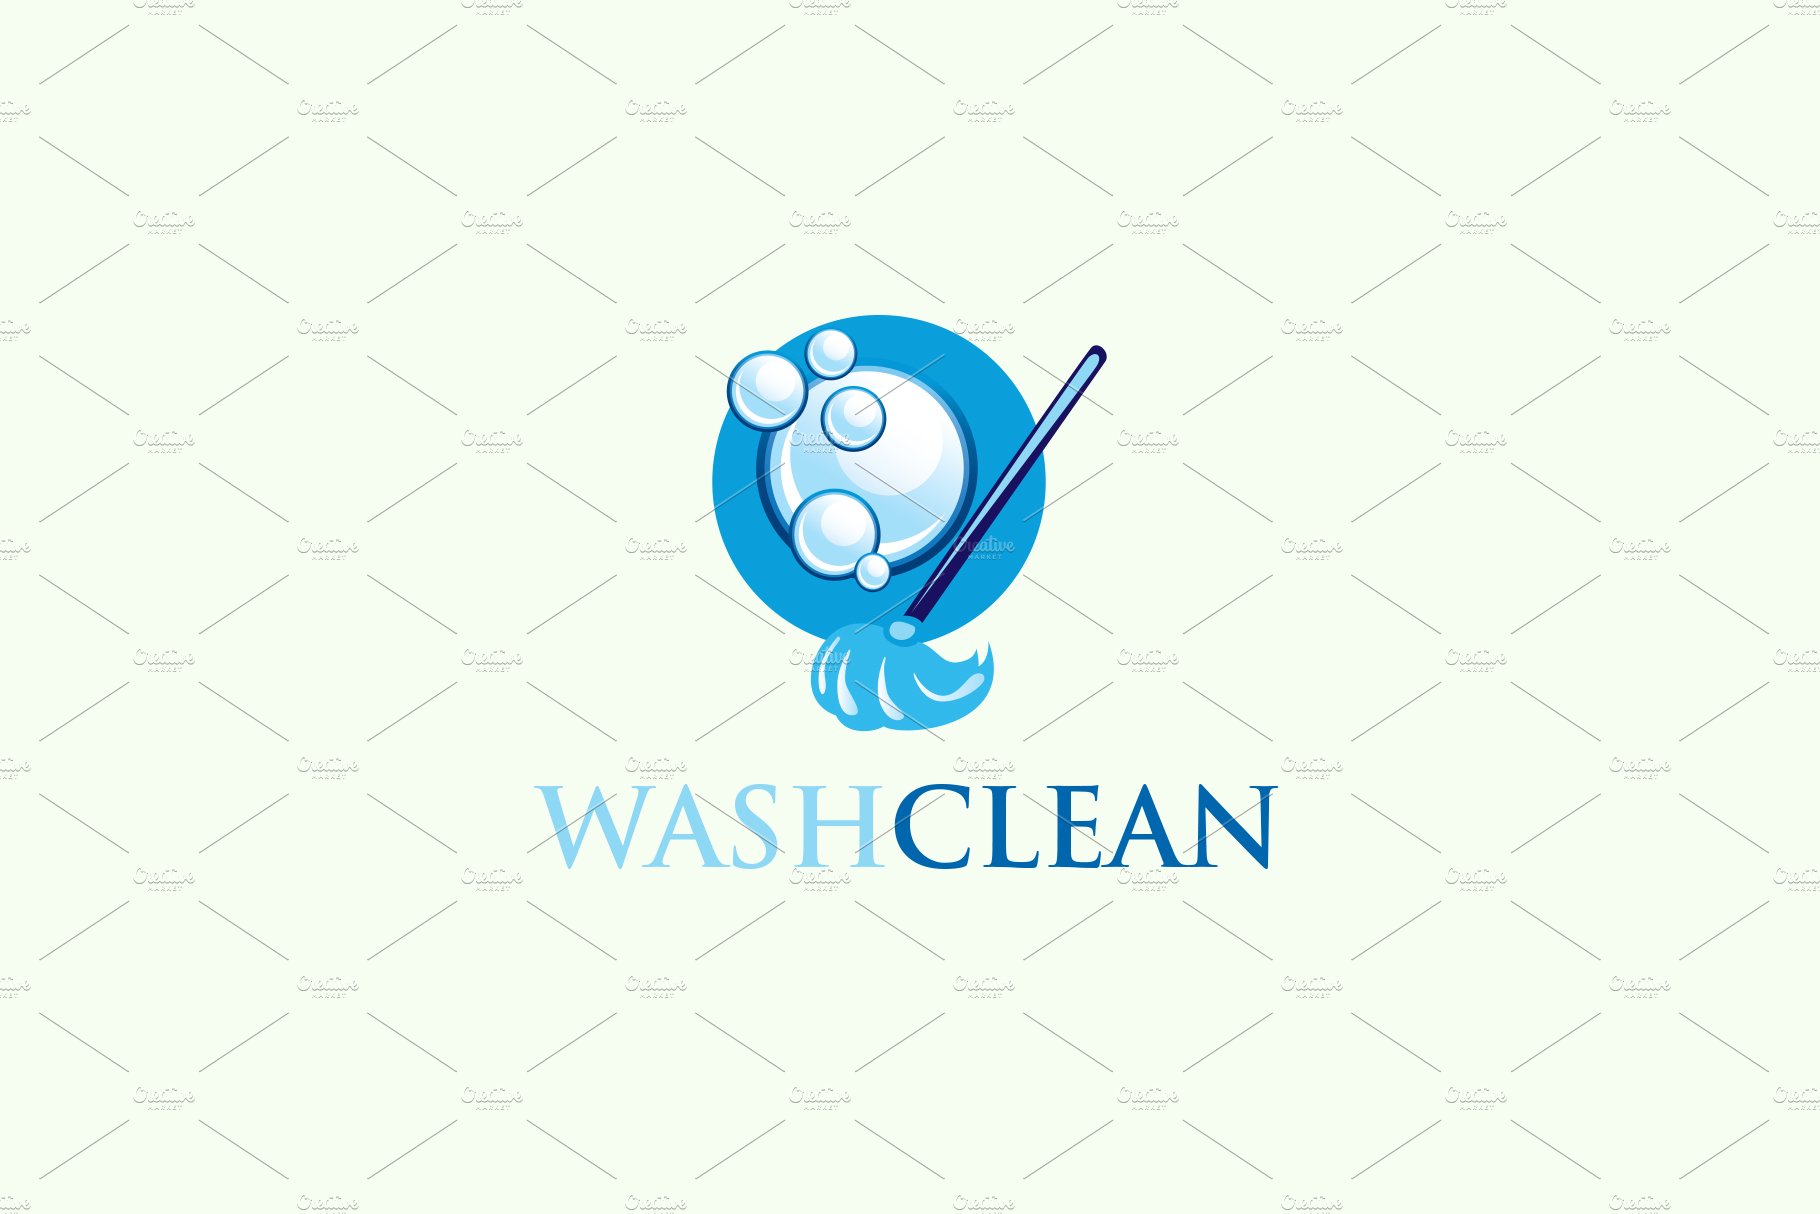 Wash Clean Logo cover image.